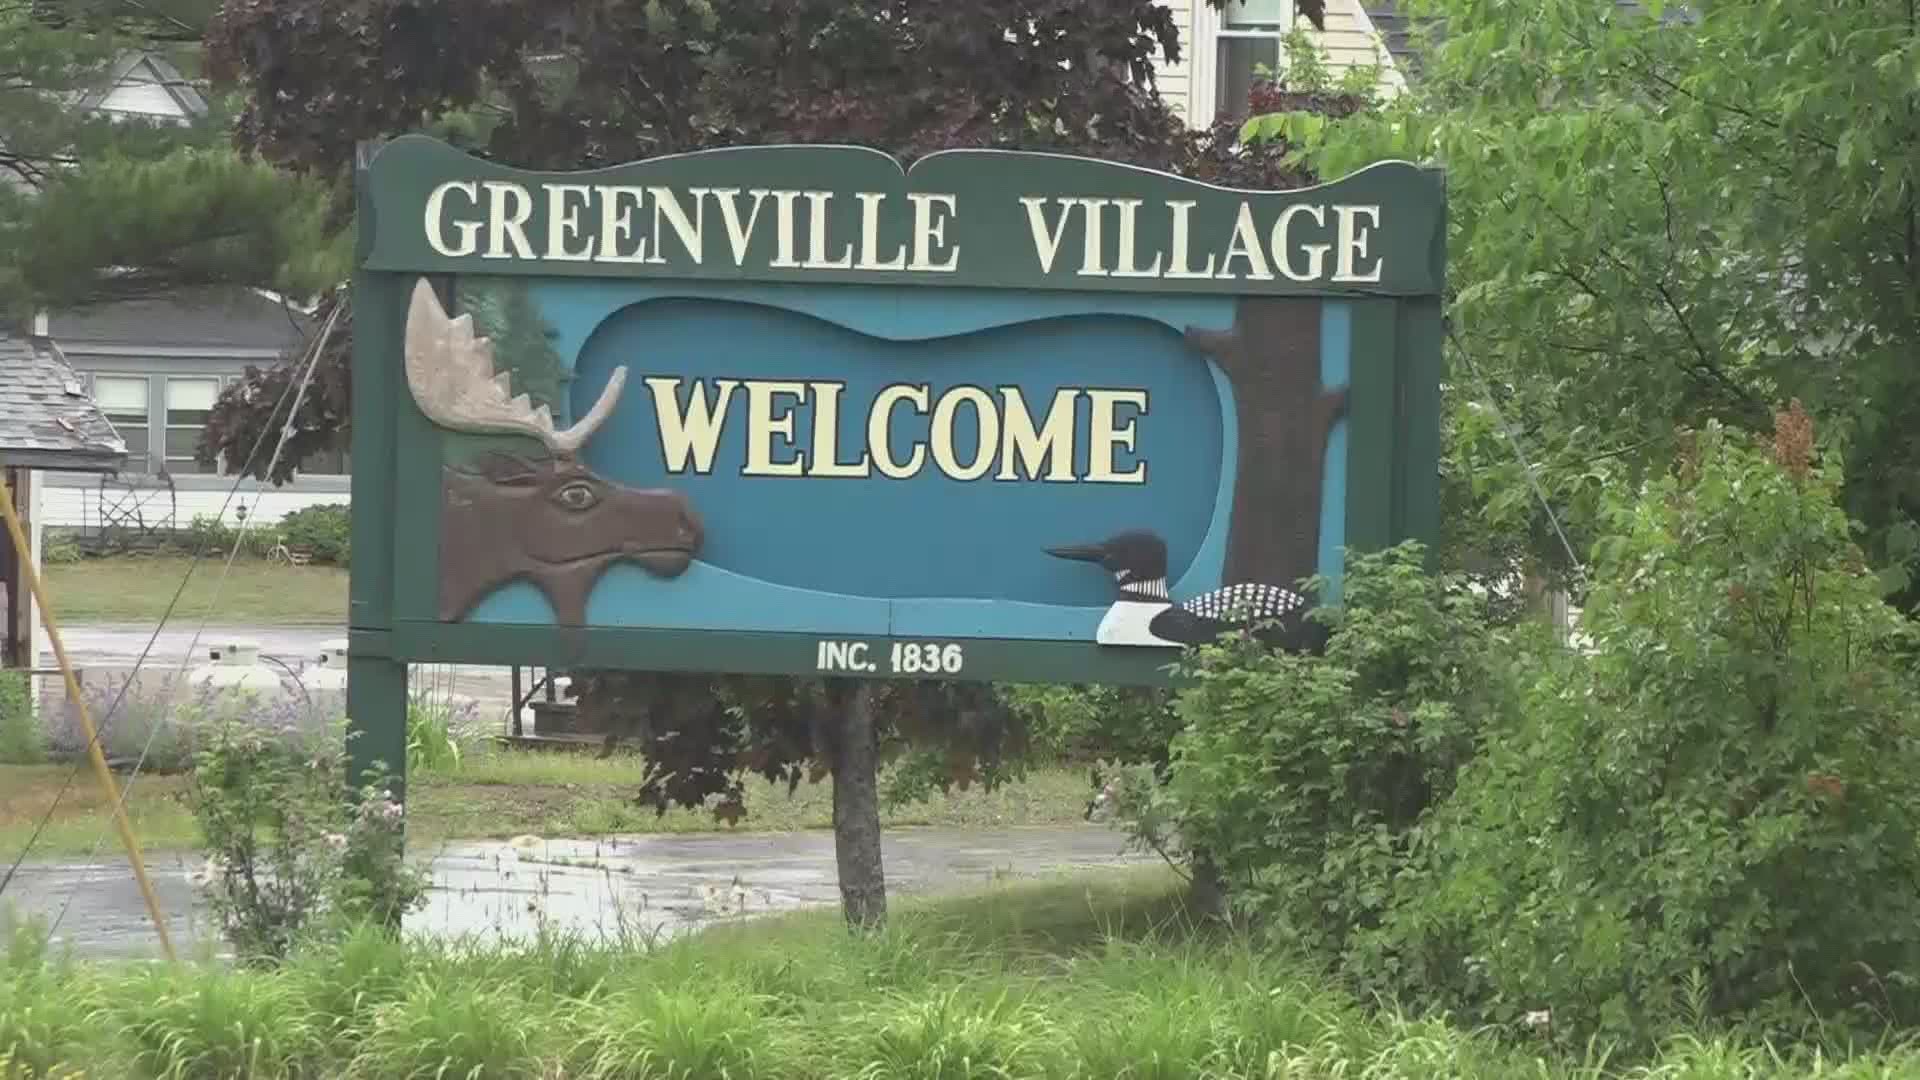 Greenville is one of the few communities still planning to light off fireworks this weekend.